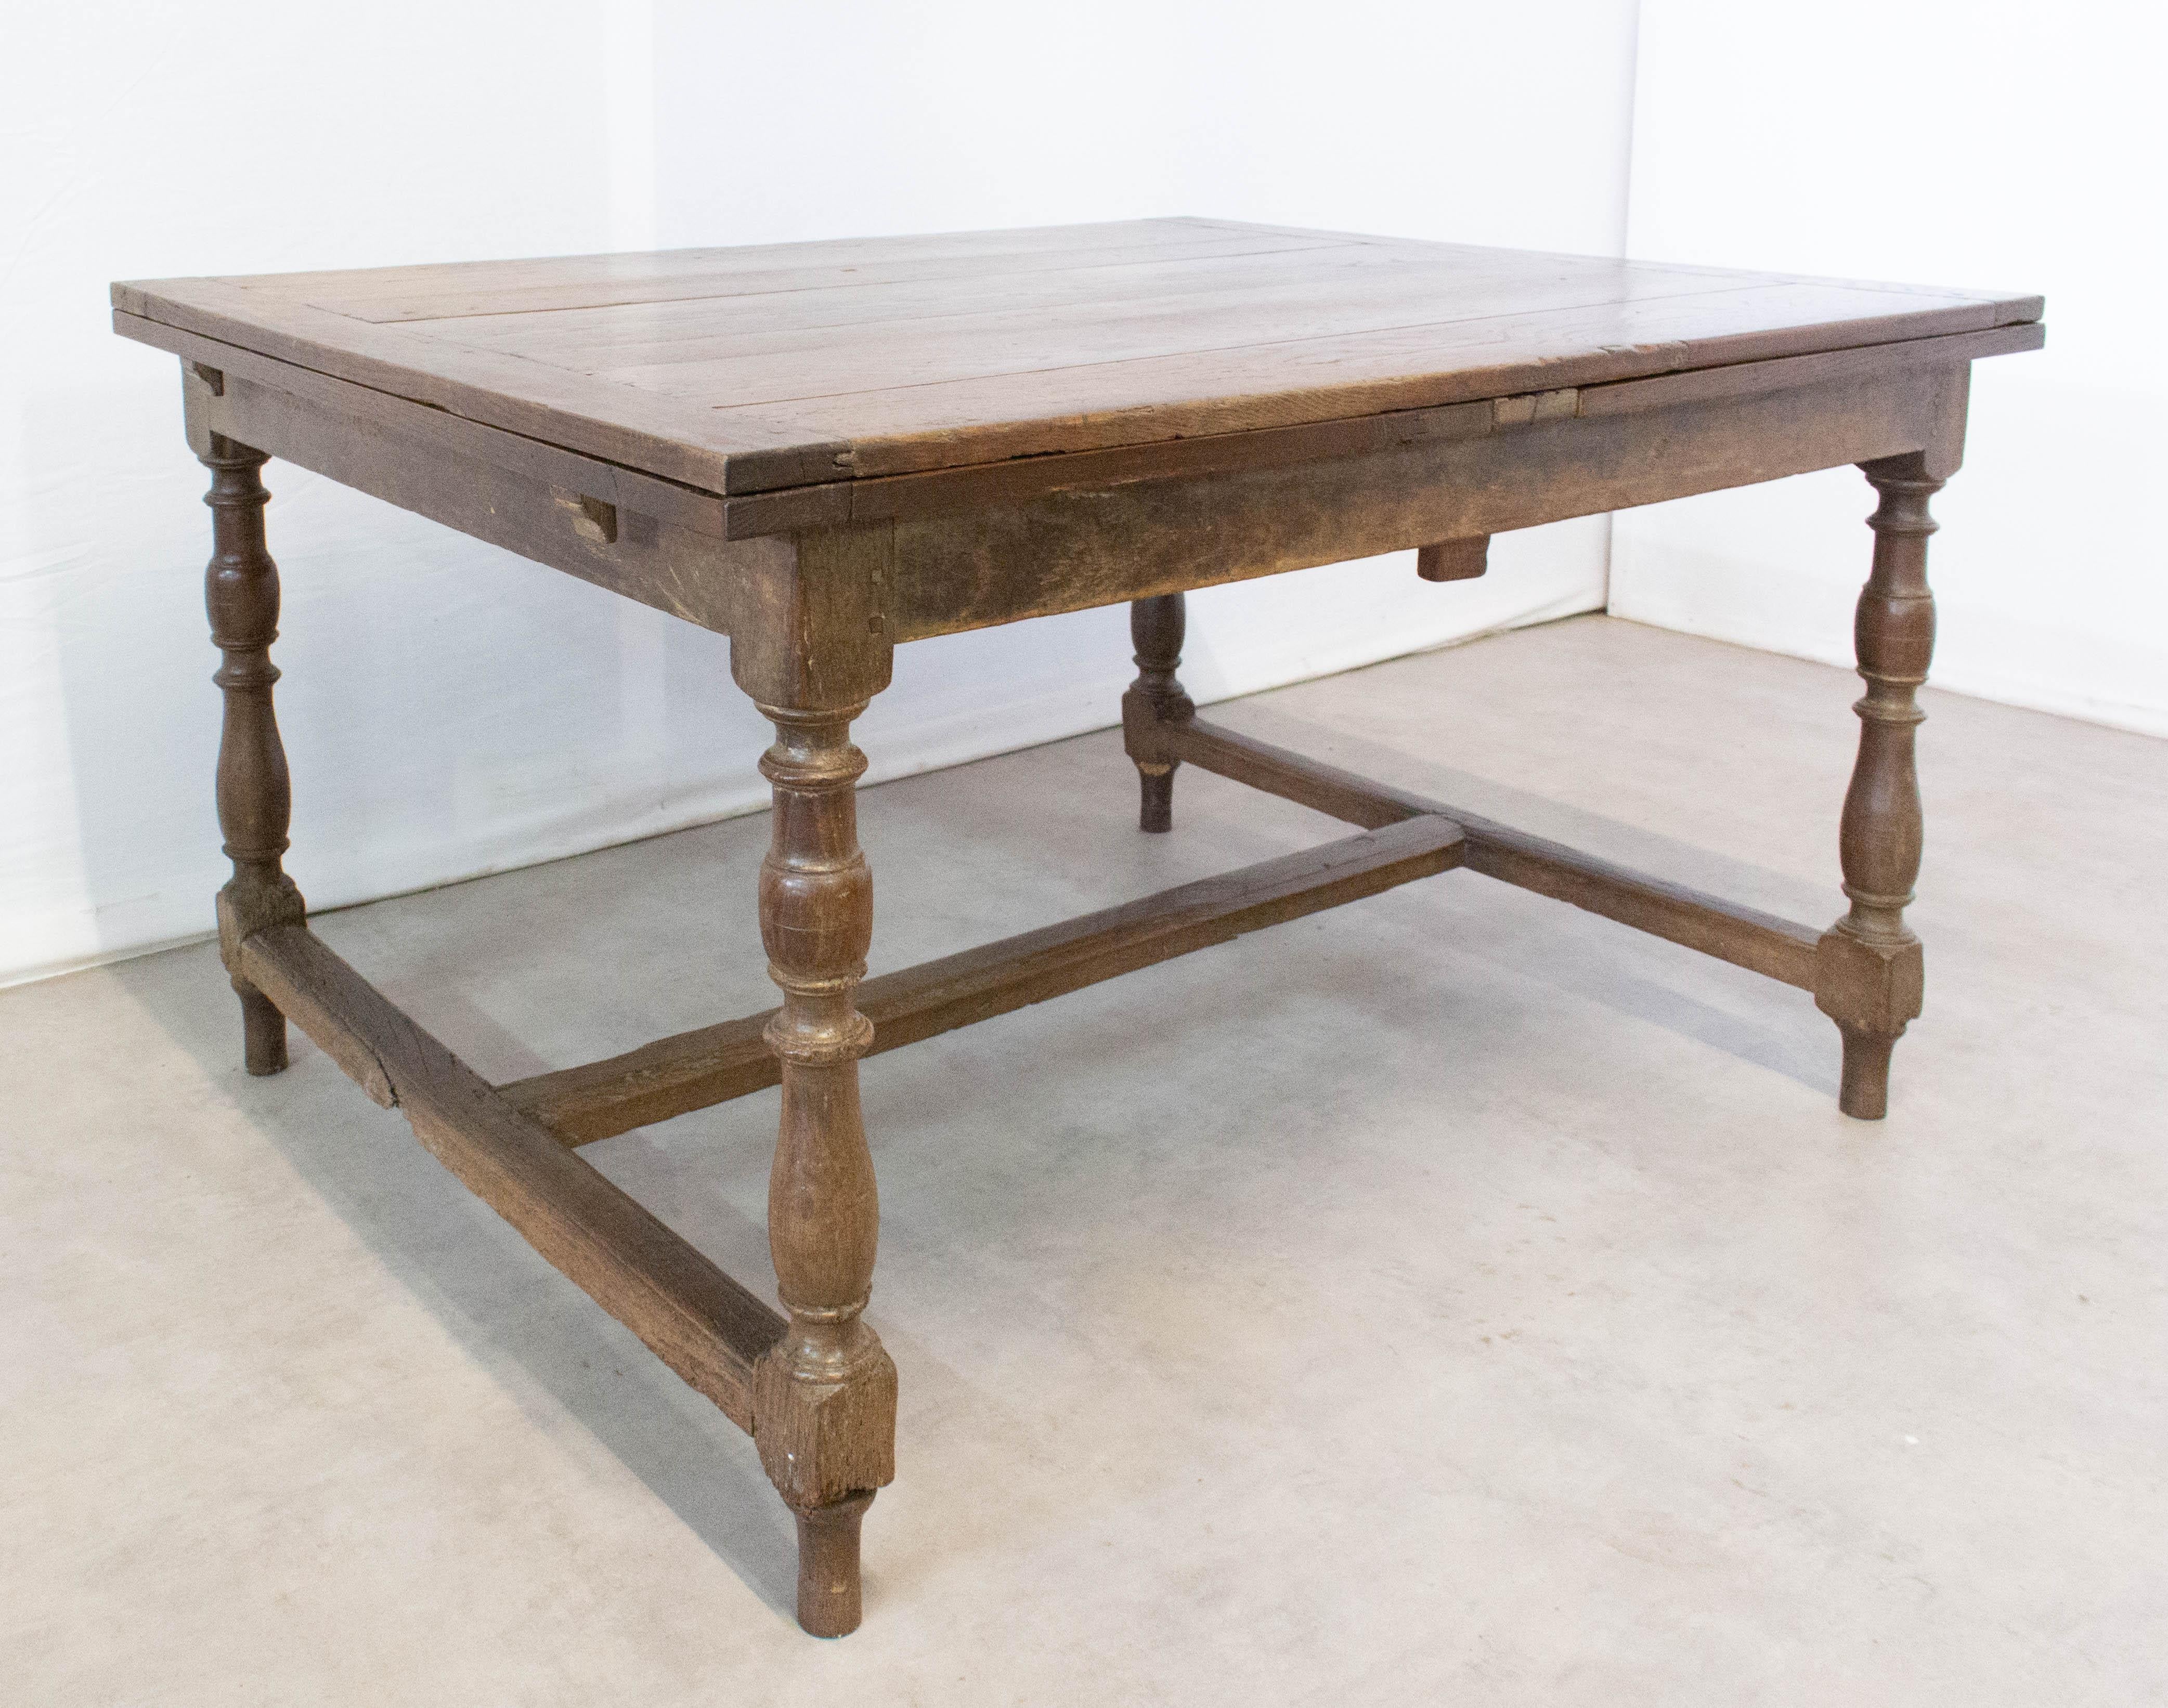 19th century solid oak dining extendable table from France
It will extend to 100 in. (254 cm)
Good antique condition, with minor signs of wear please see photos.

For shipping: 132 x 75 x 104cm 70kg.

  